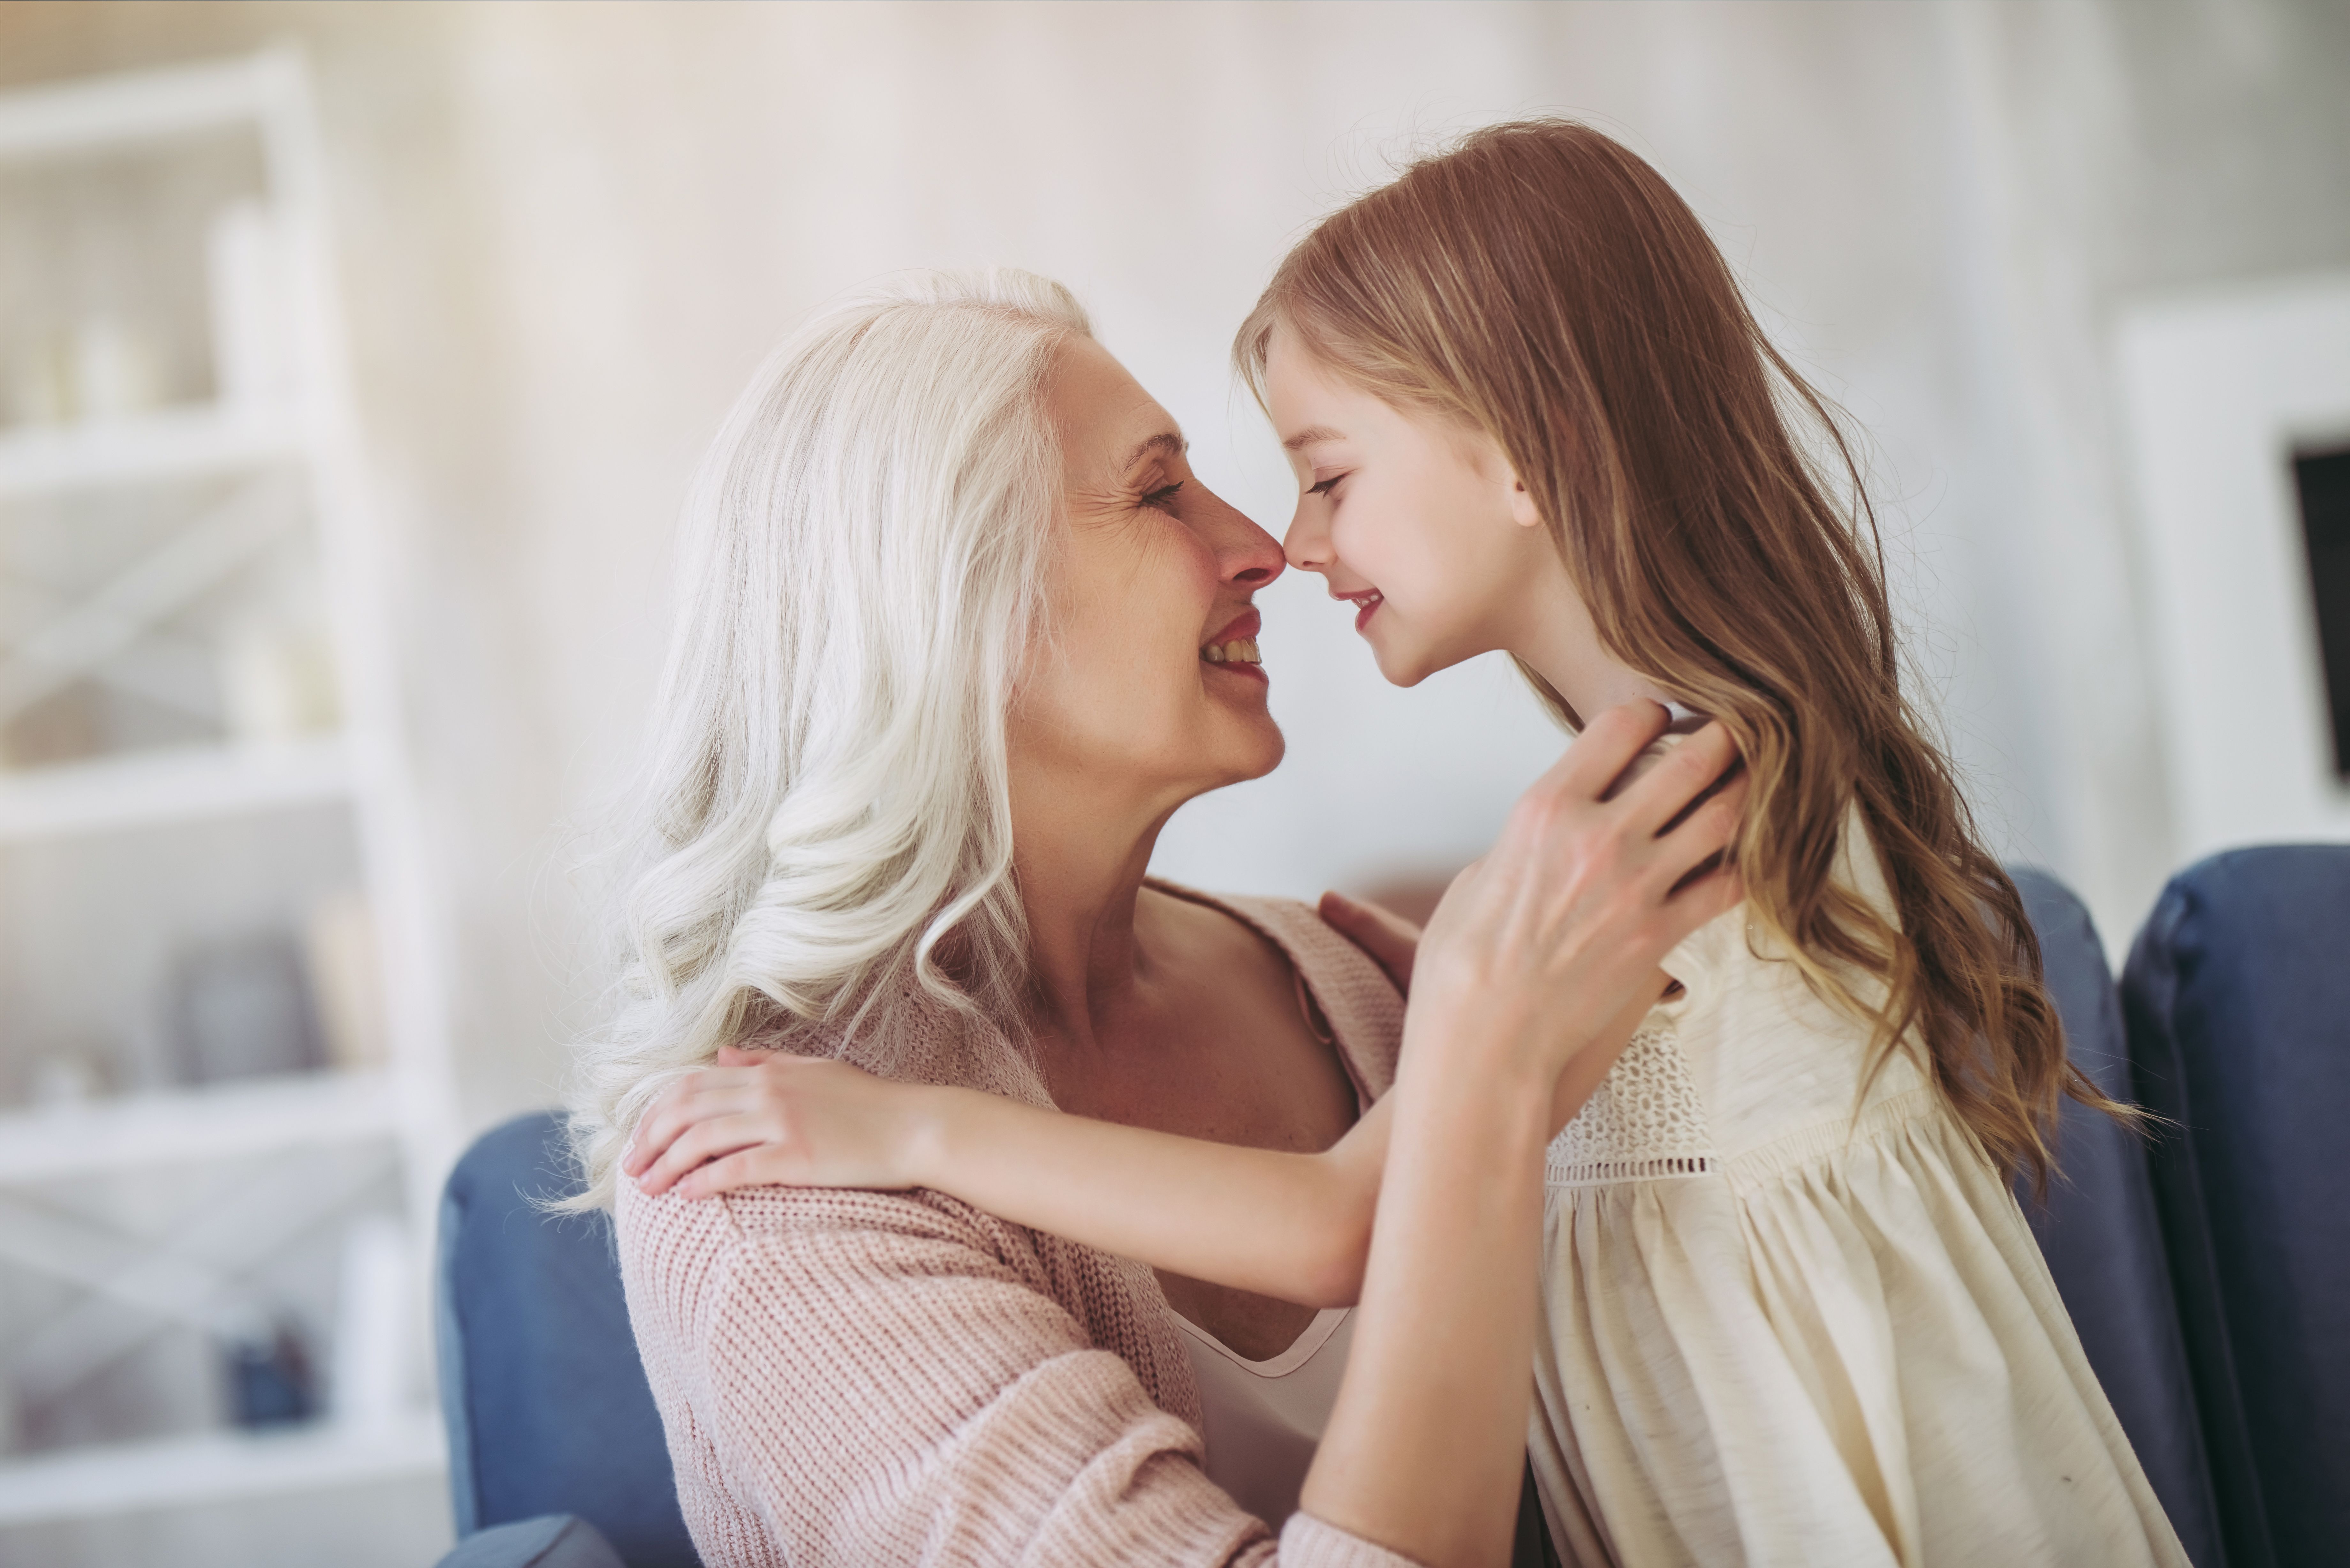 A grandmother and a grandchild sharing a sweet moment. | Source: Shutterstock